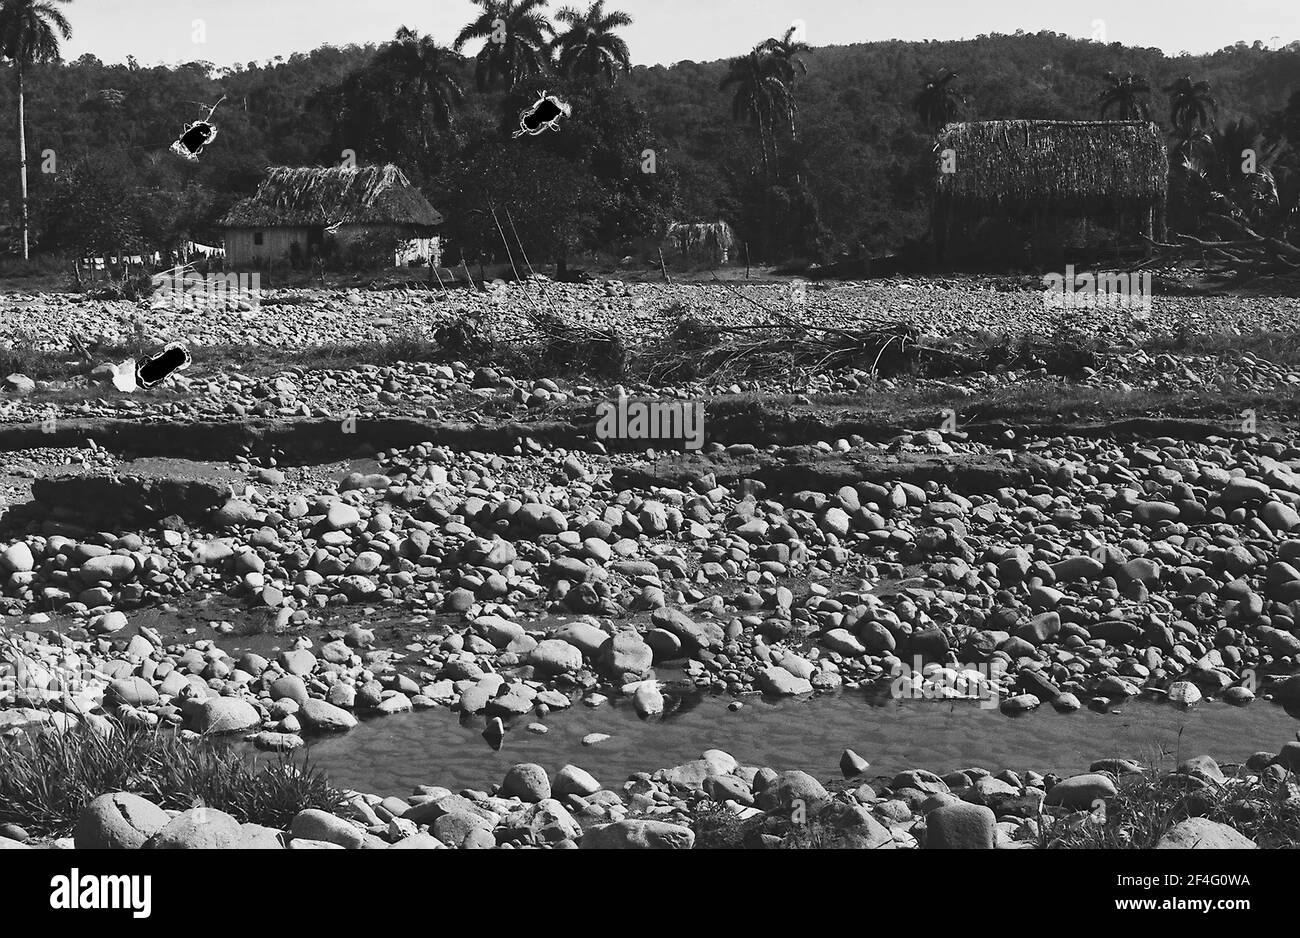 Dry bed of Rio Cauto river, Cuba, Granma province, 1963. From the Deena Stryker photographs collection. () Stock Photo